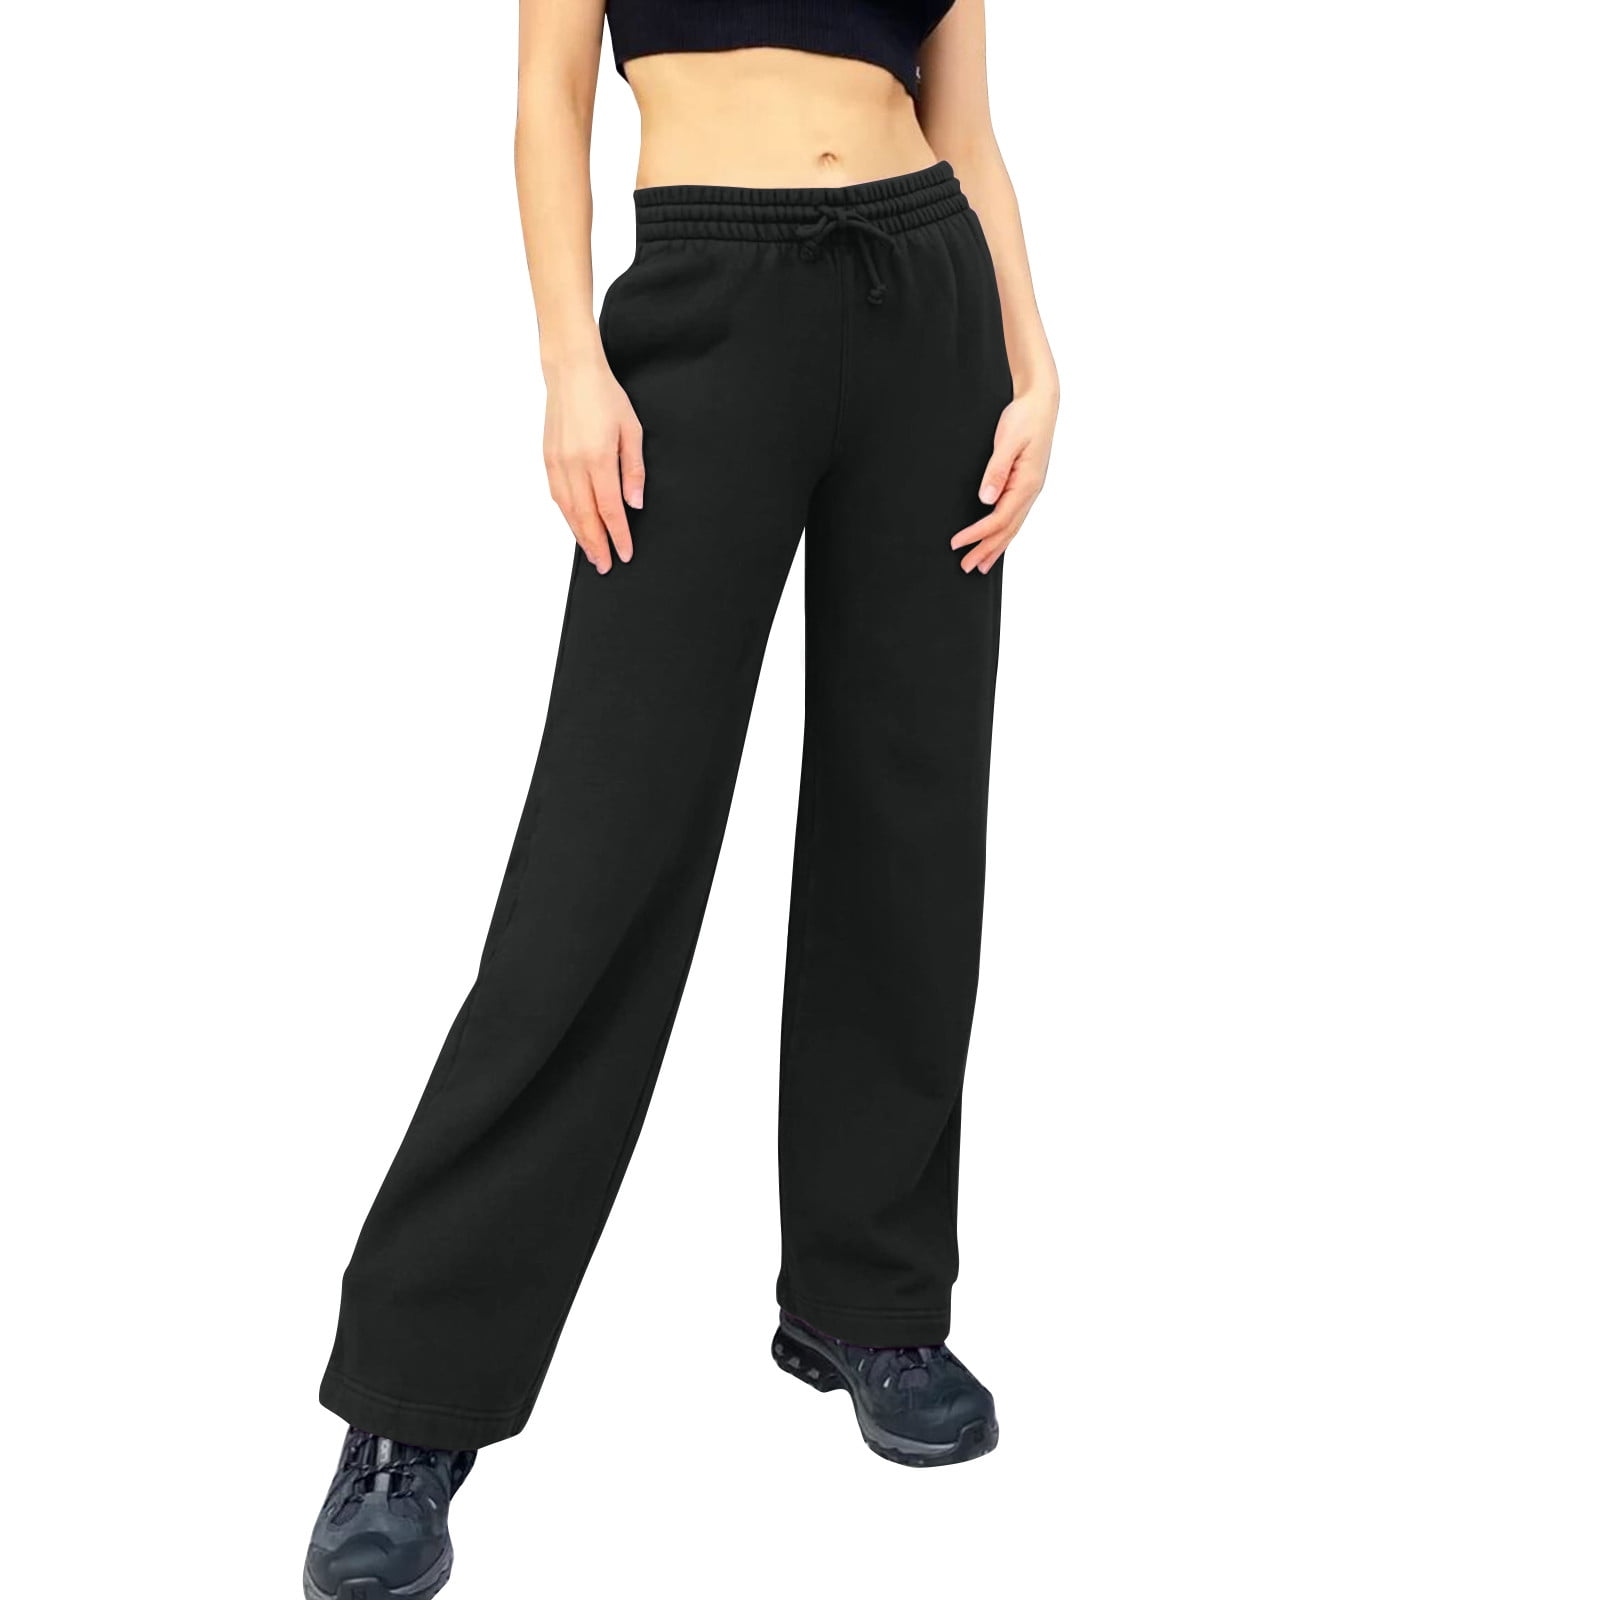 Susanny Tall Sweatpants for Women Drawstring Straight Leg with Pockets  Fleece Lined Lounge Pants High Waisted Comfy Baggy Petite Lazy Sweatpants  Black S 